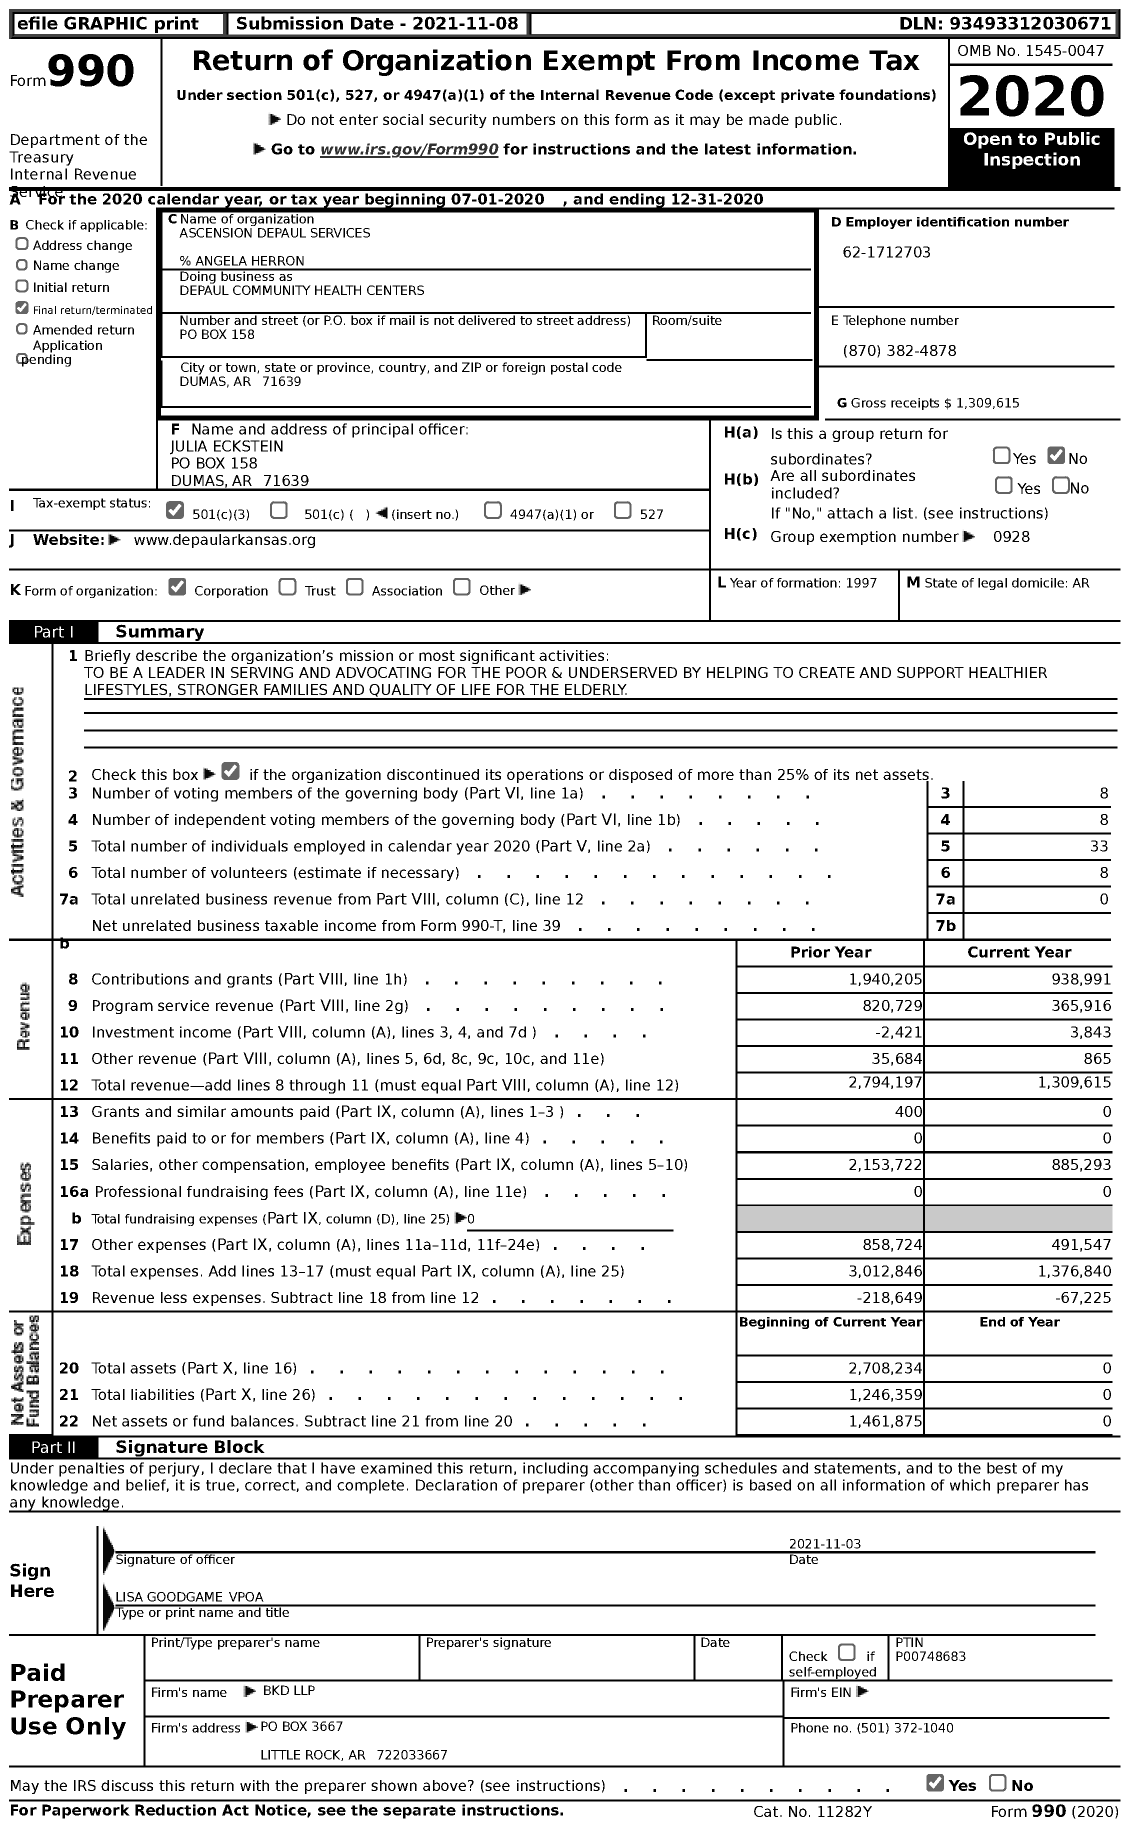 Image of first page of 2020 Form 990 for DePaul Community Health Centers / Ascension Depaul Services